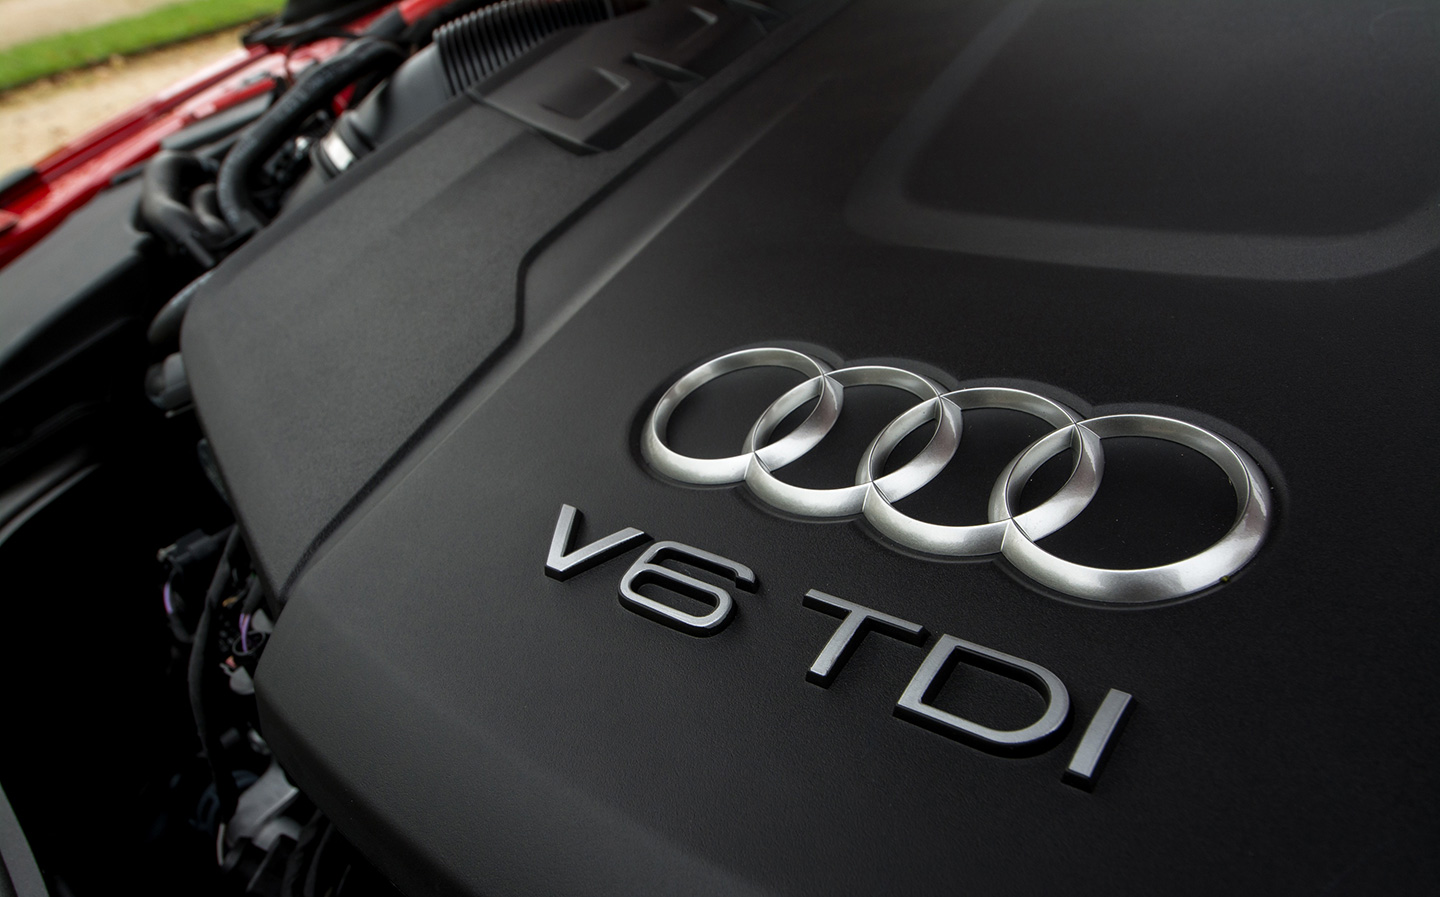 Audi agrees to pay £700m fine for diesel emissions scandal